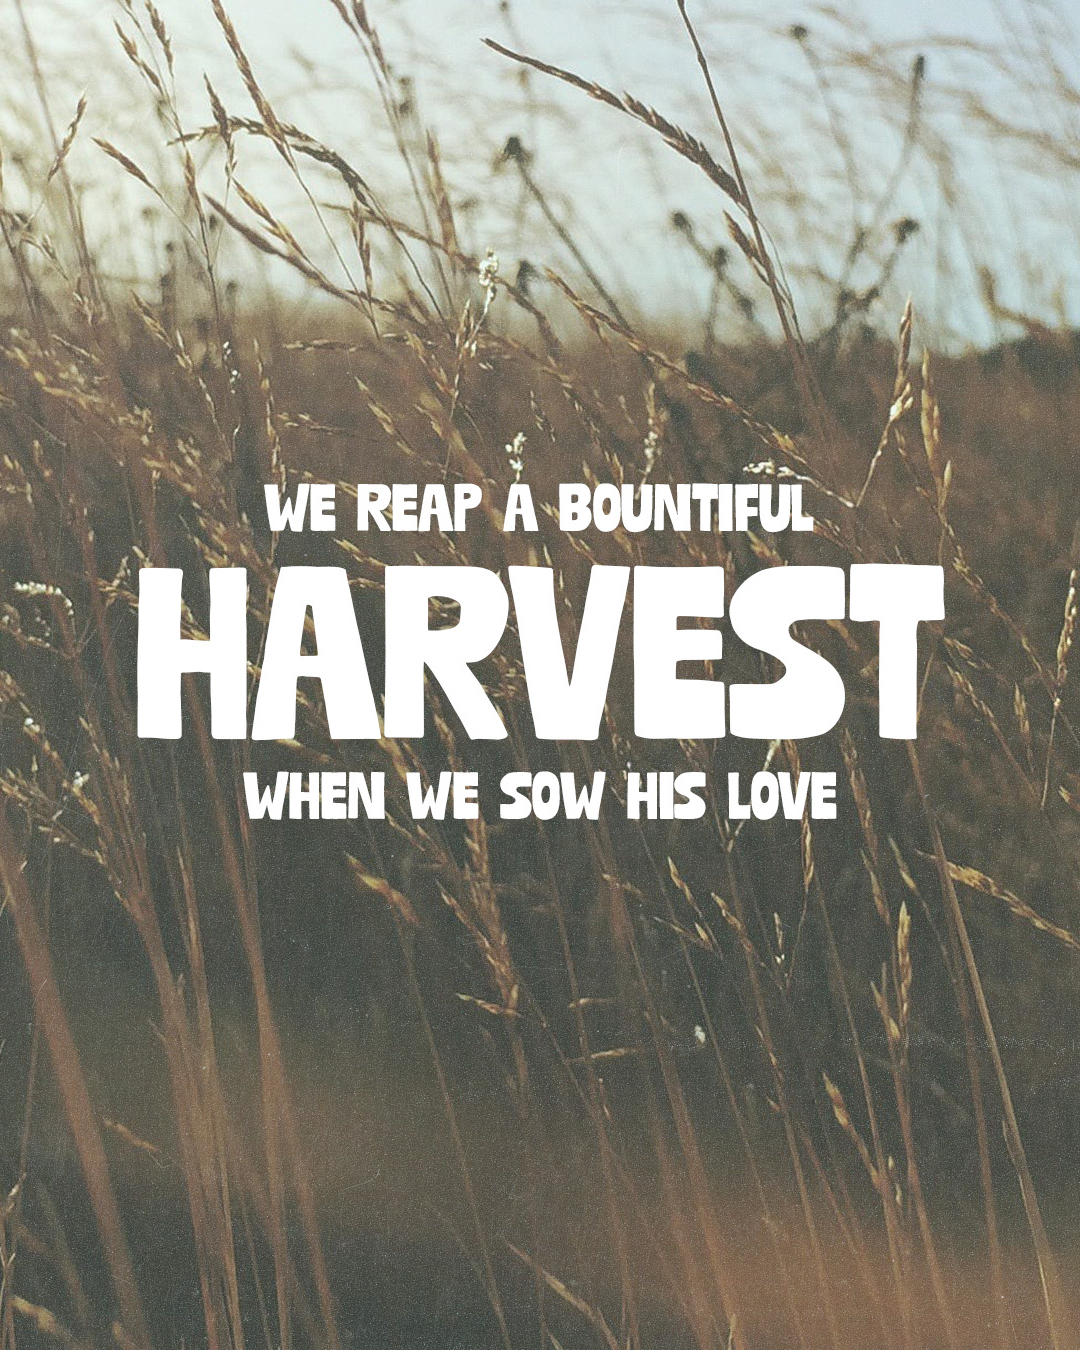 We reap a bountiful harvest when we sow his love